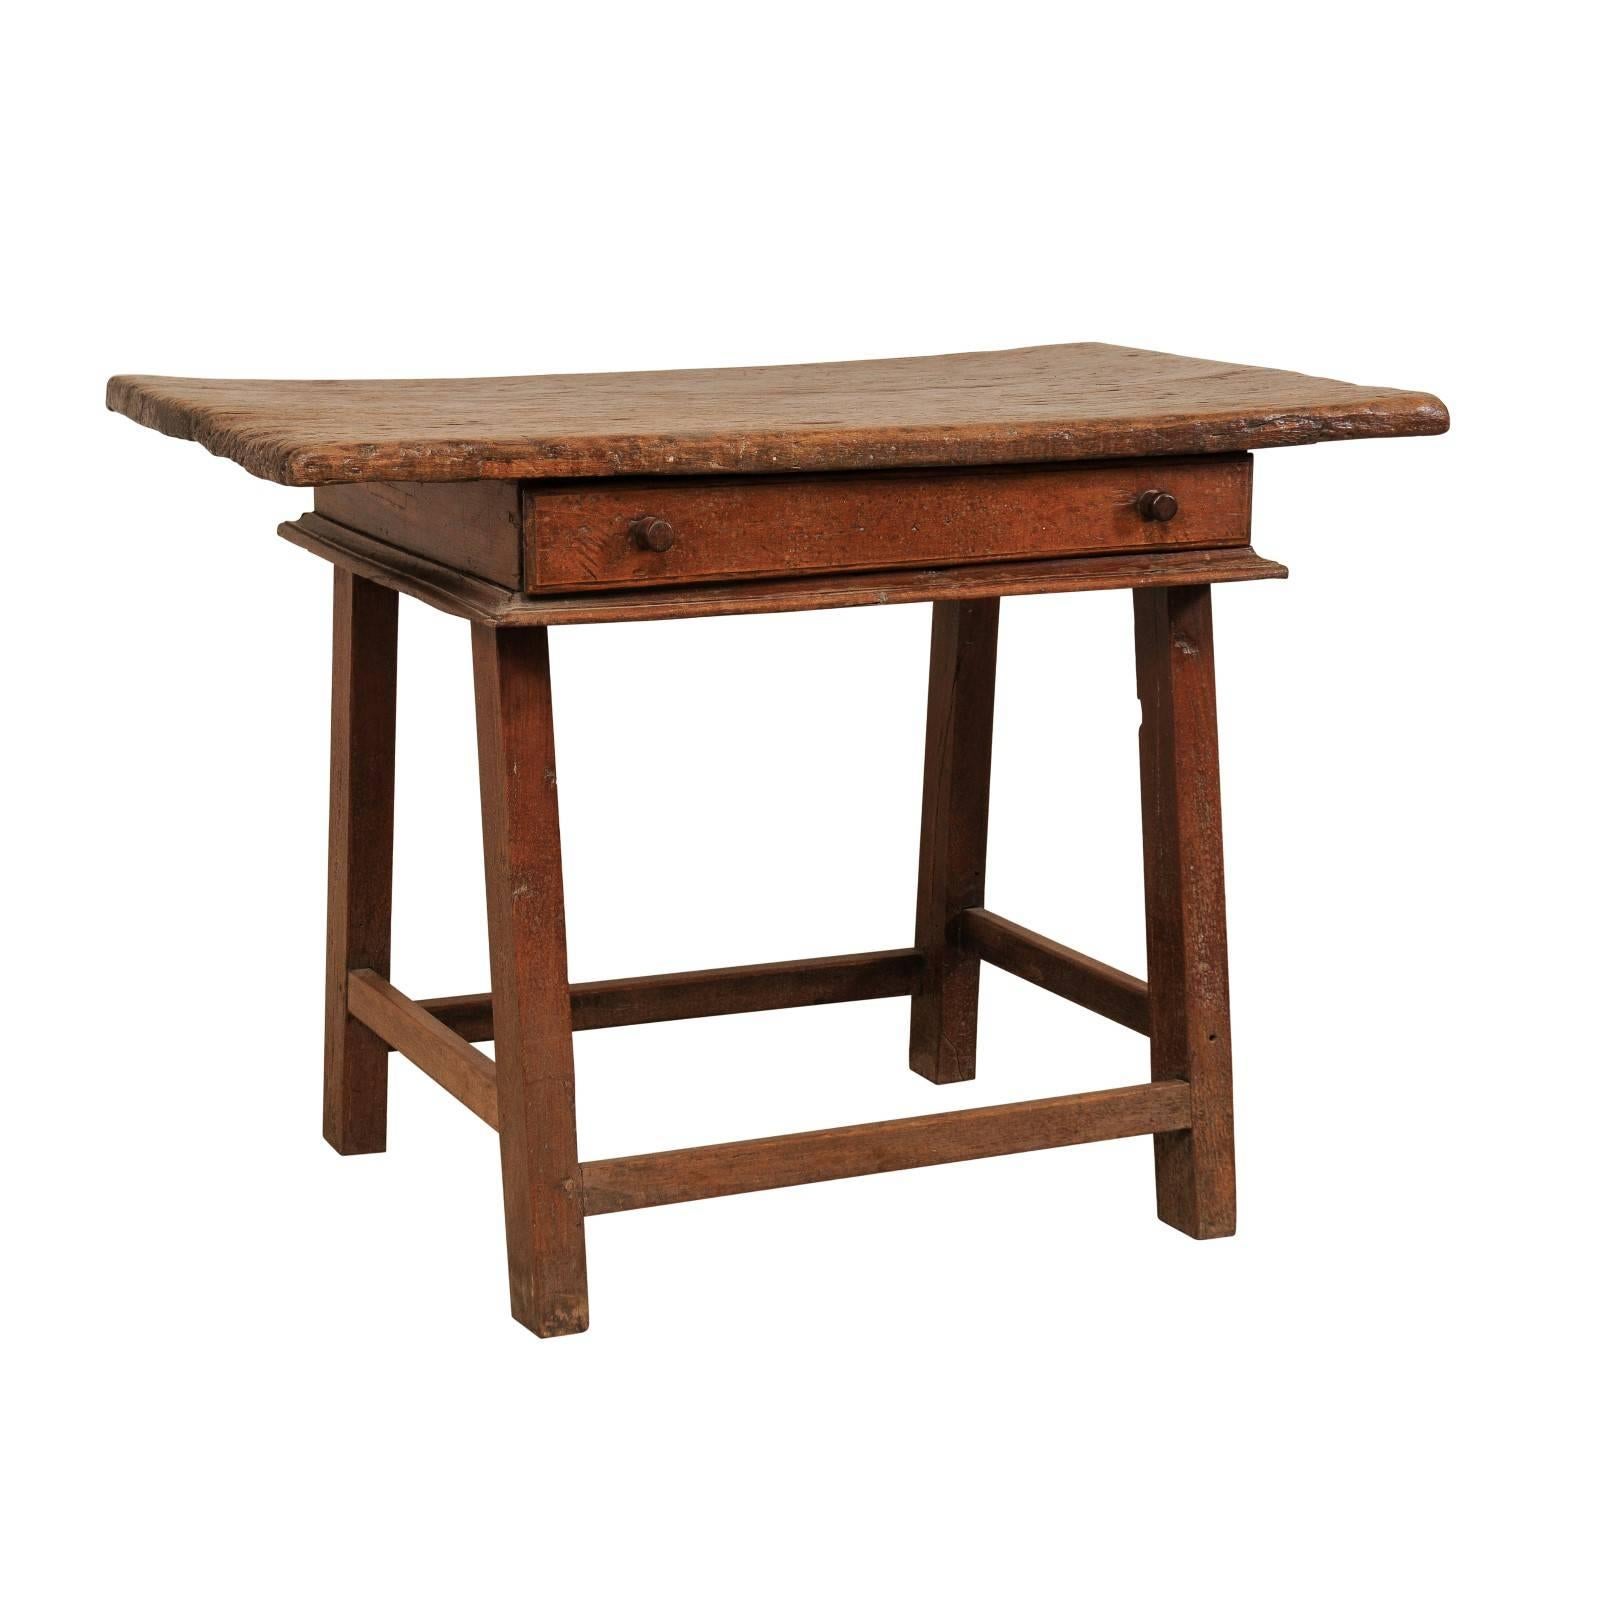 18th Century Brazilian Peroba Tropical Wood Side Table with Single Drawer For Sale